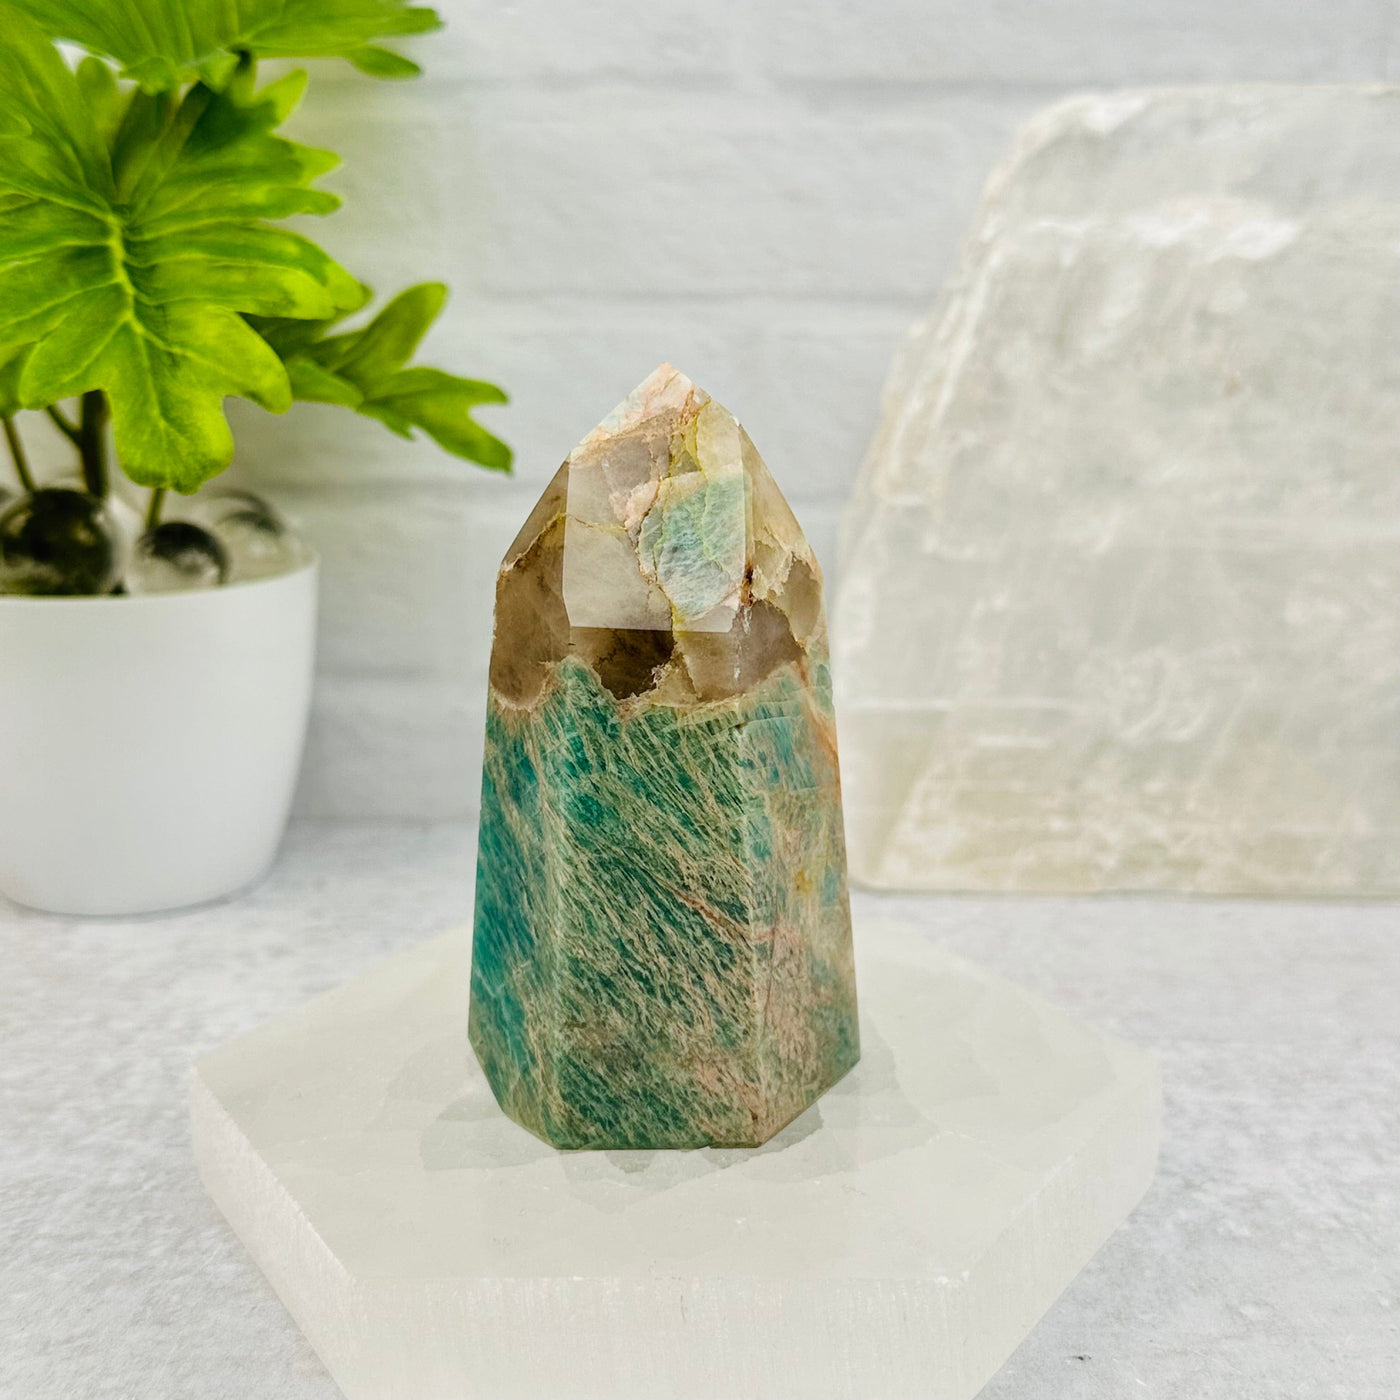 Amazonite Crystal Polished Tower Obelisk Point displayed as home decor